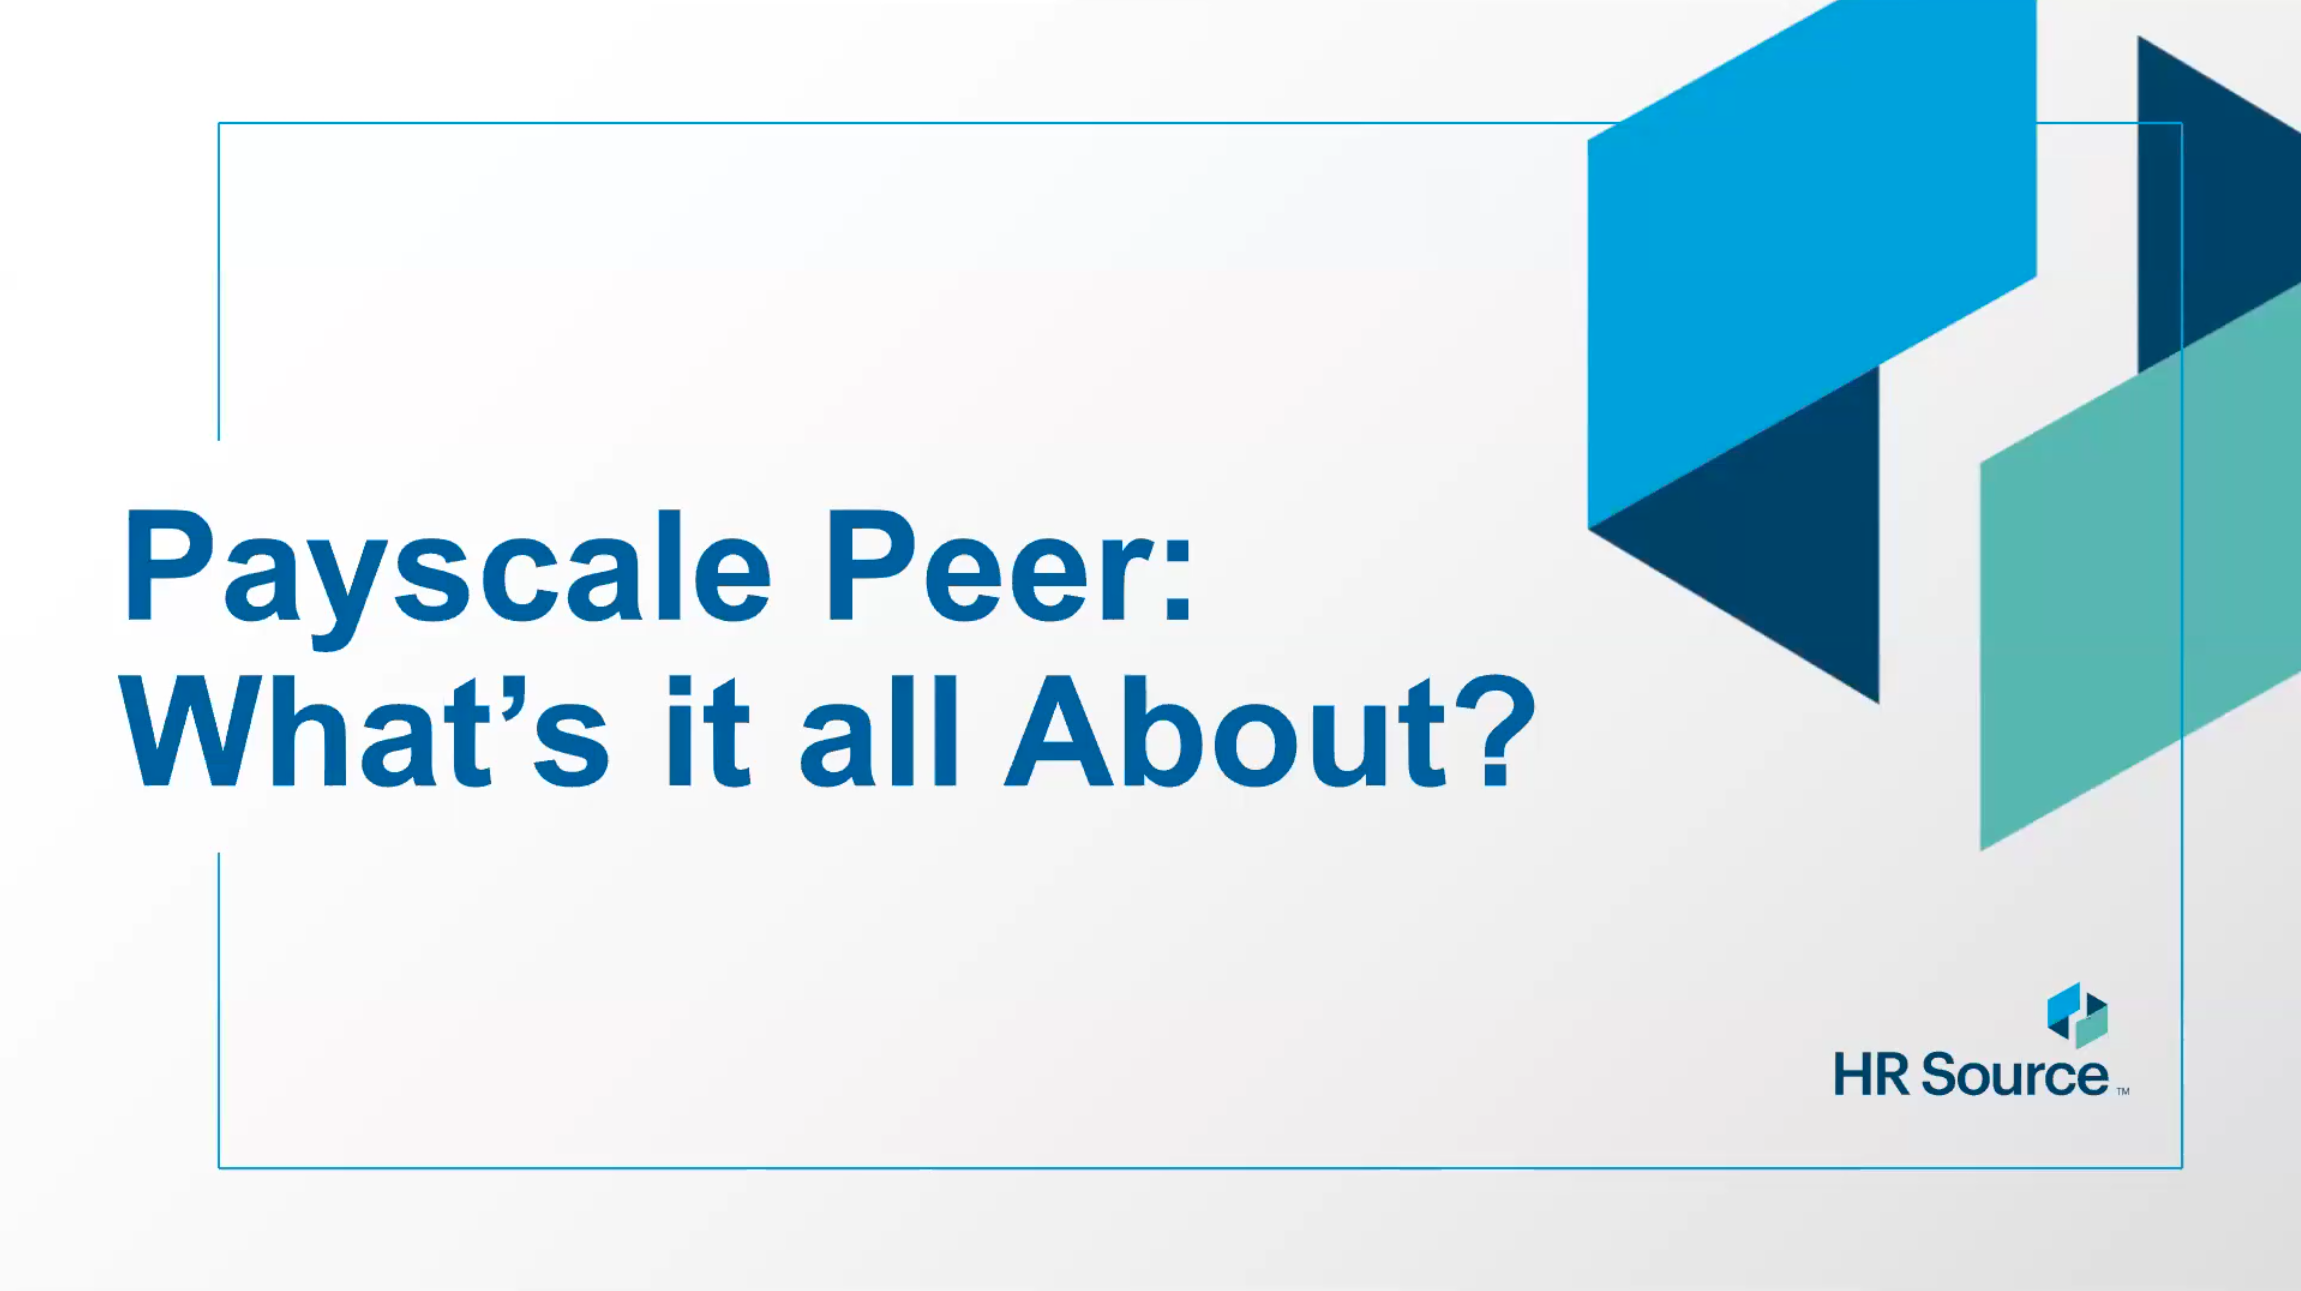 Payscale Peer: What's It All About?